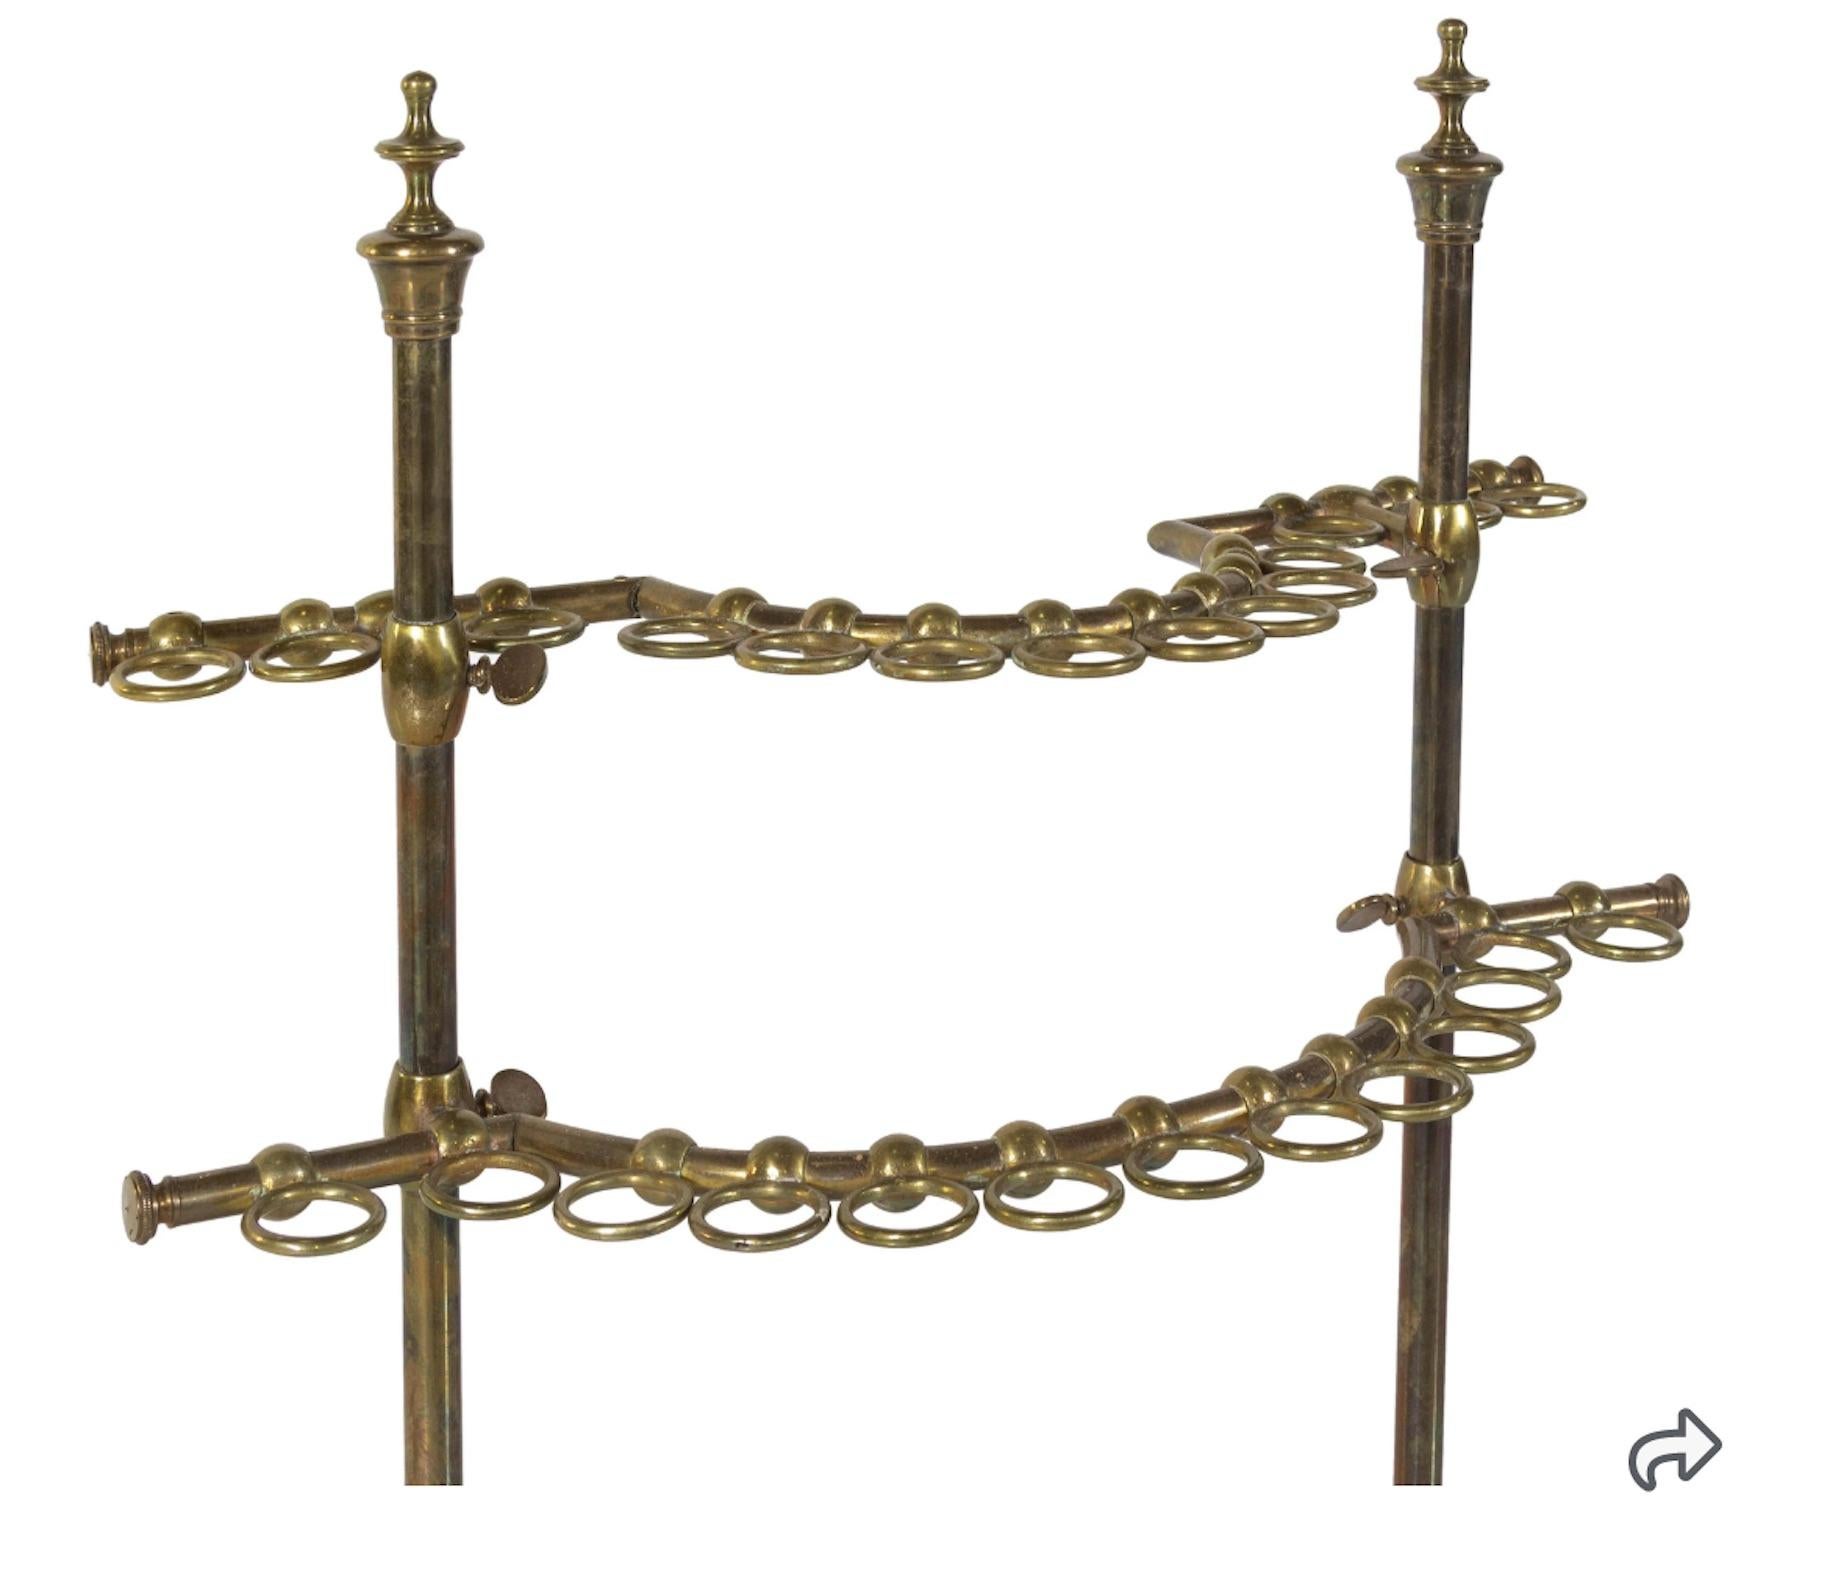 A rare English brass cane/pool cue stand
19th century shown with the colletion of canes, not included.
Measures: Height 41 1/2 x width 22 inches.
Property from an important private collection.